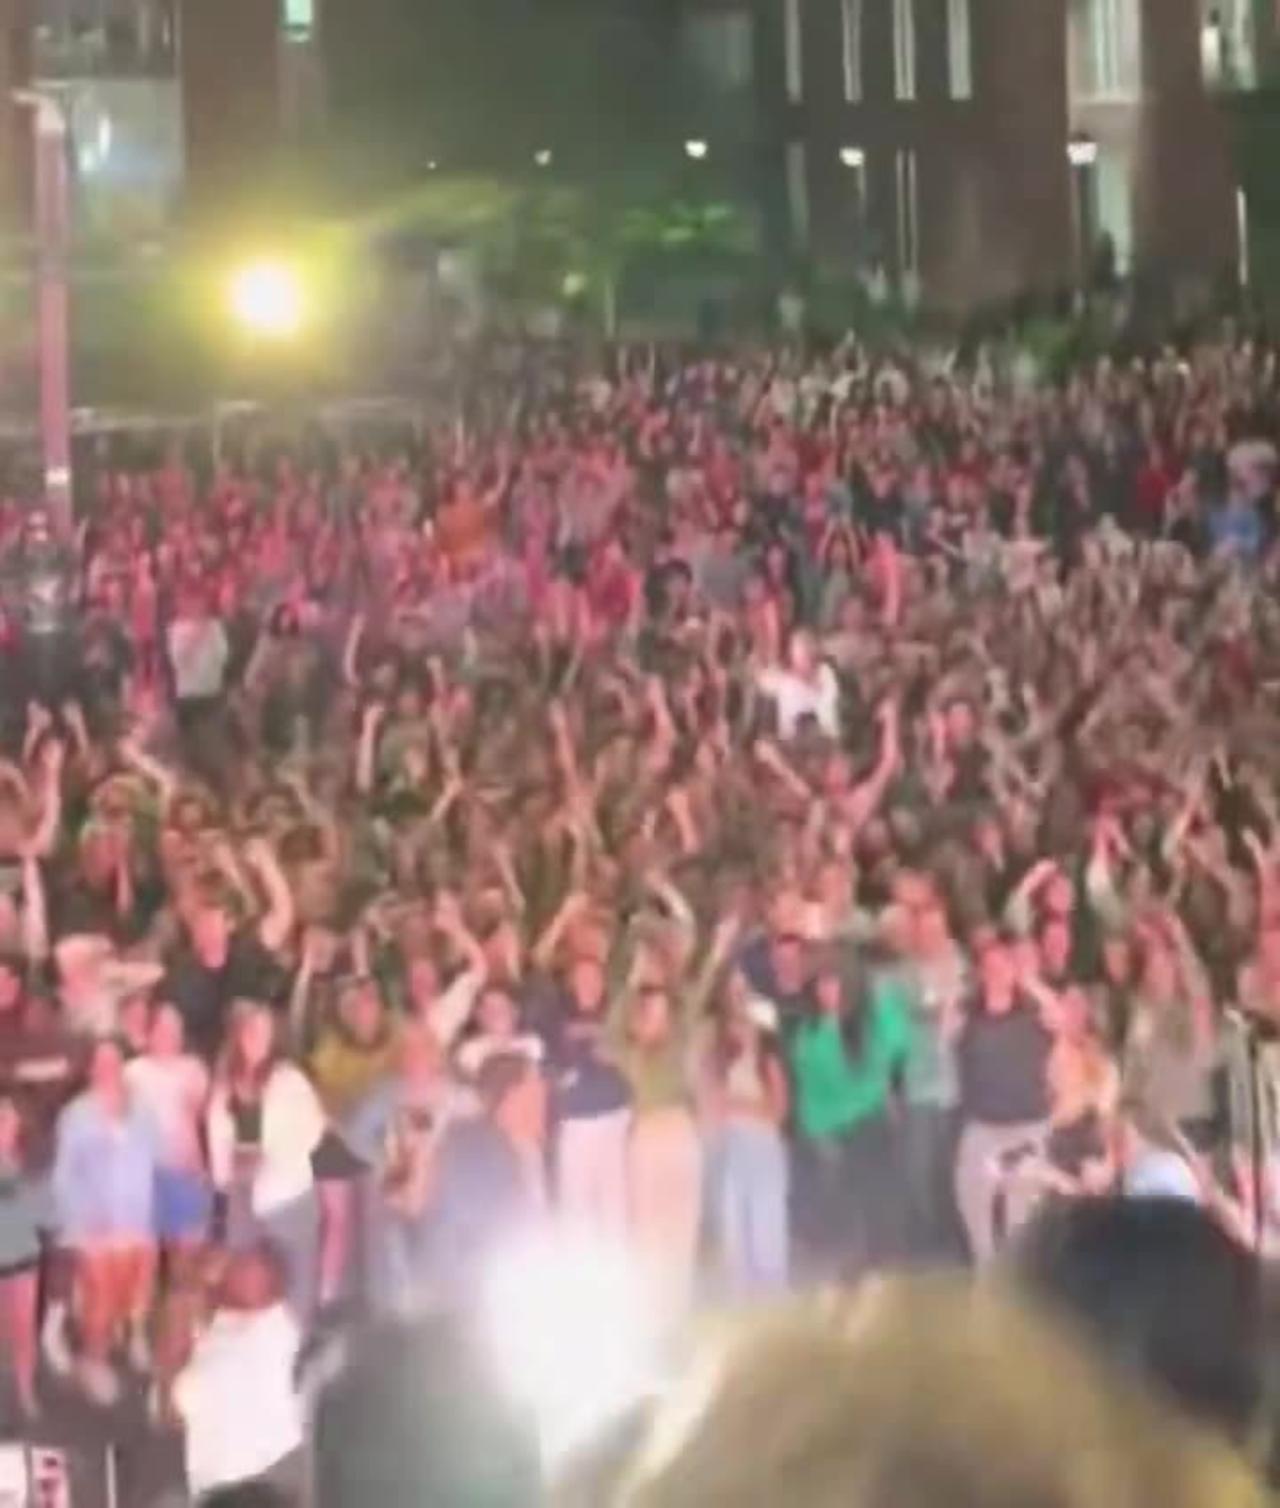 These students were told they had to stay silent… so they decided to throw a massive party worshiping the Lord!